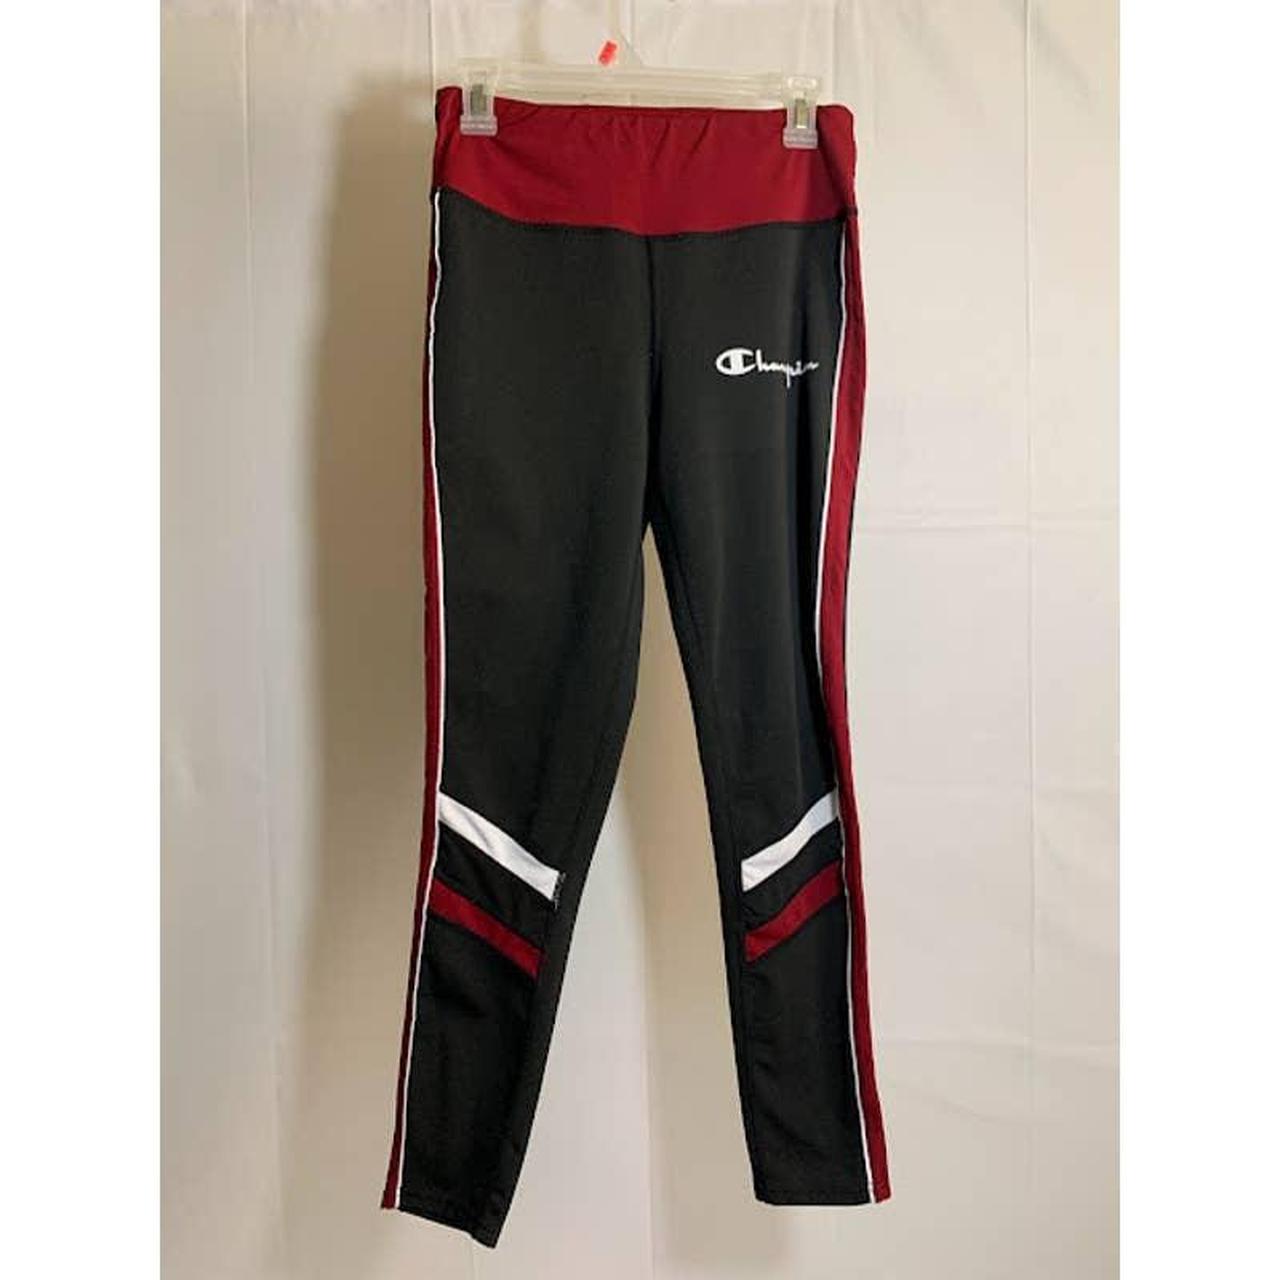 Champion Women's Leggings size xl Red and black in